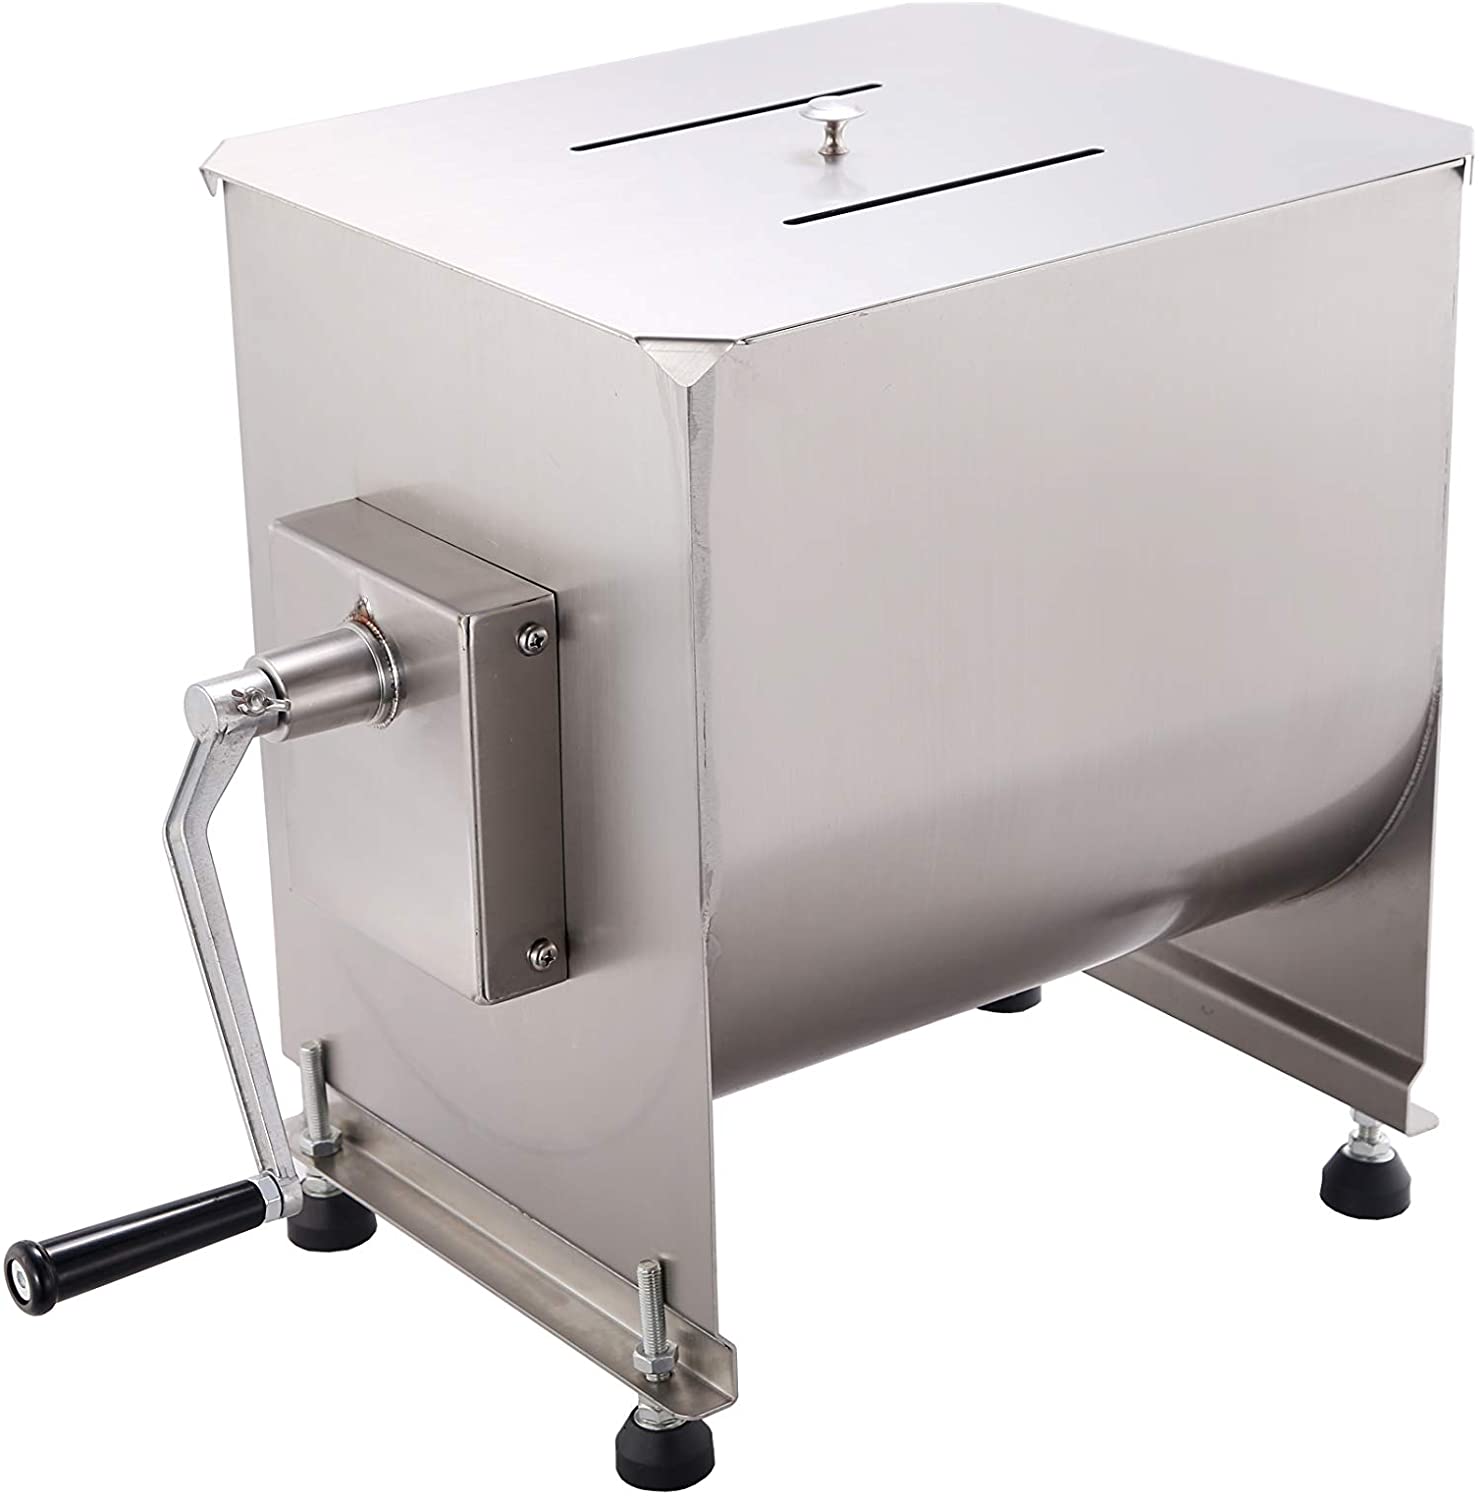 Hakka 40L/80lb Double Axis Stainless Steel Manual Meat Mixer